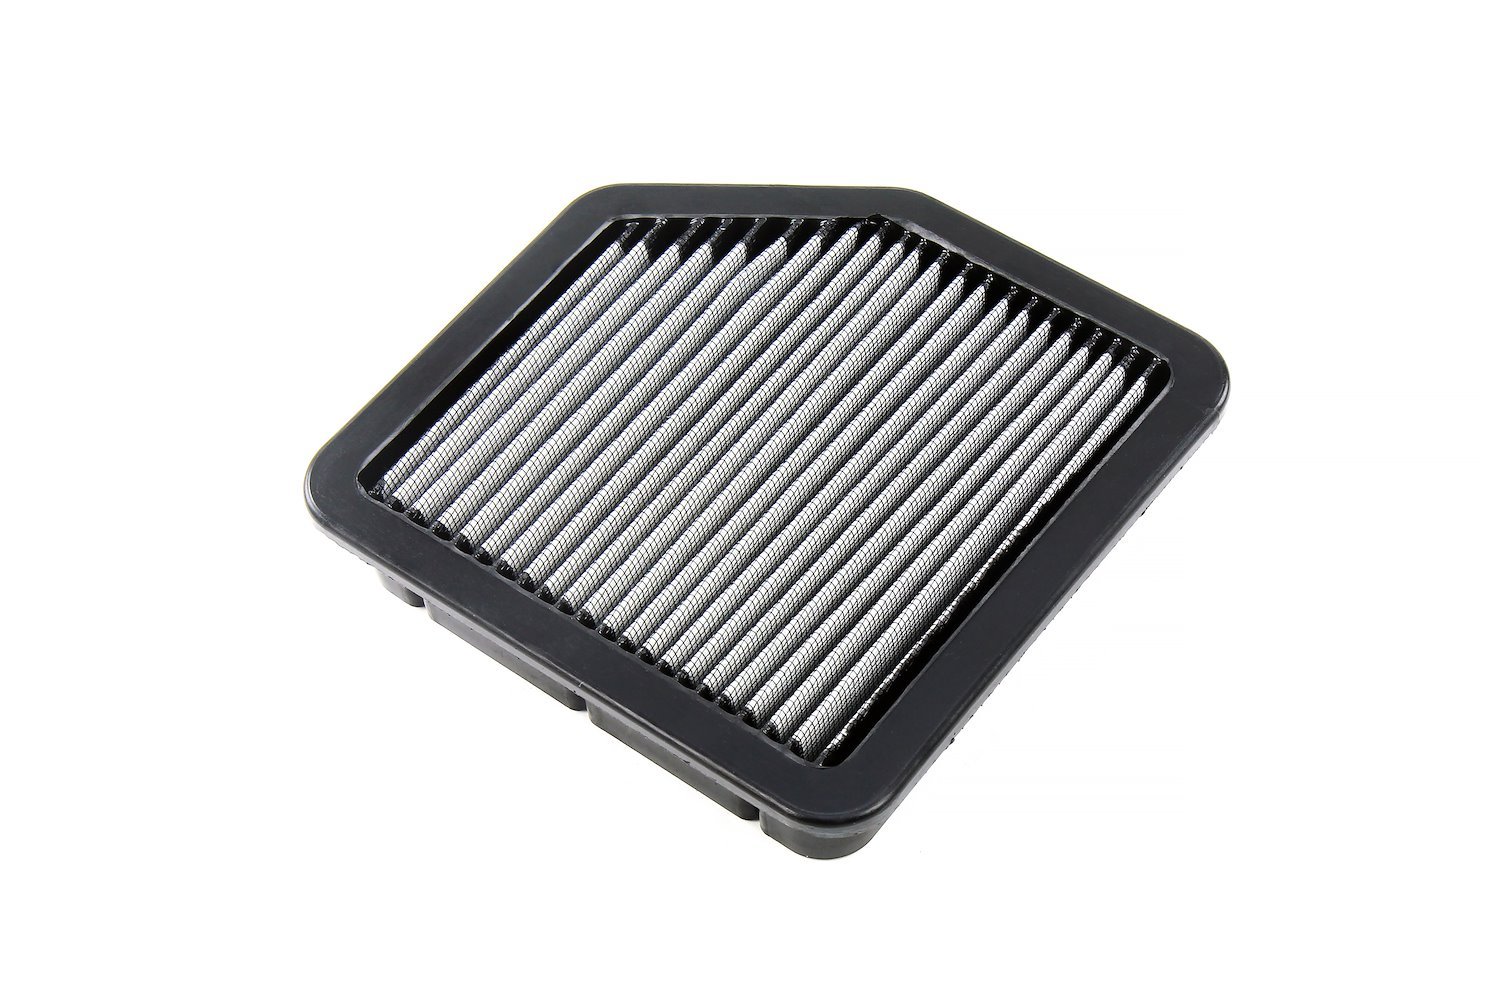 HPS-457034 Performance Drop-In Air Filter, Directly Replaces OEM Drop-In Panel Filter, Improves Performance & Fuel Economy